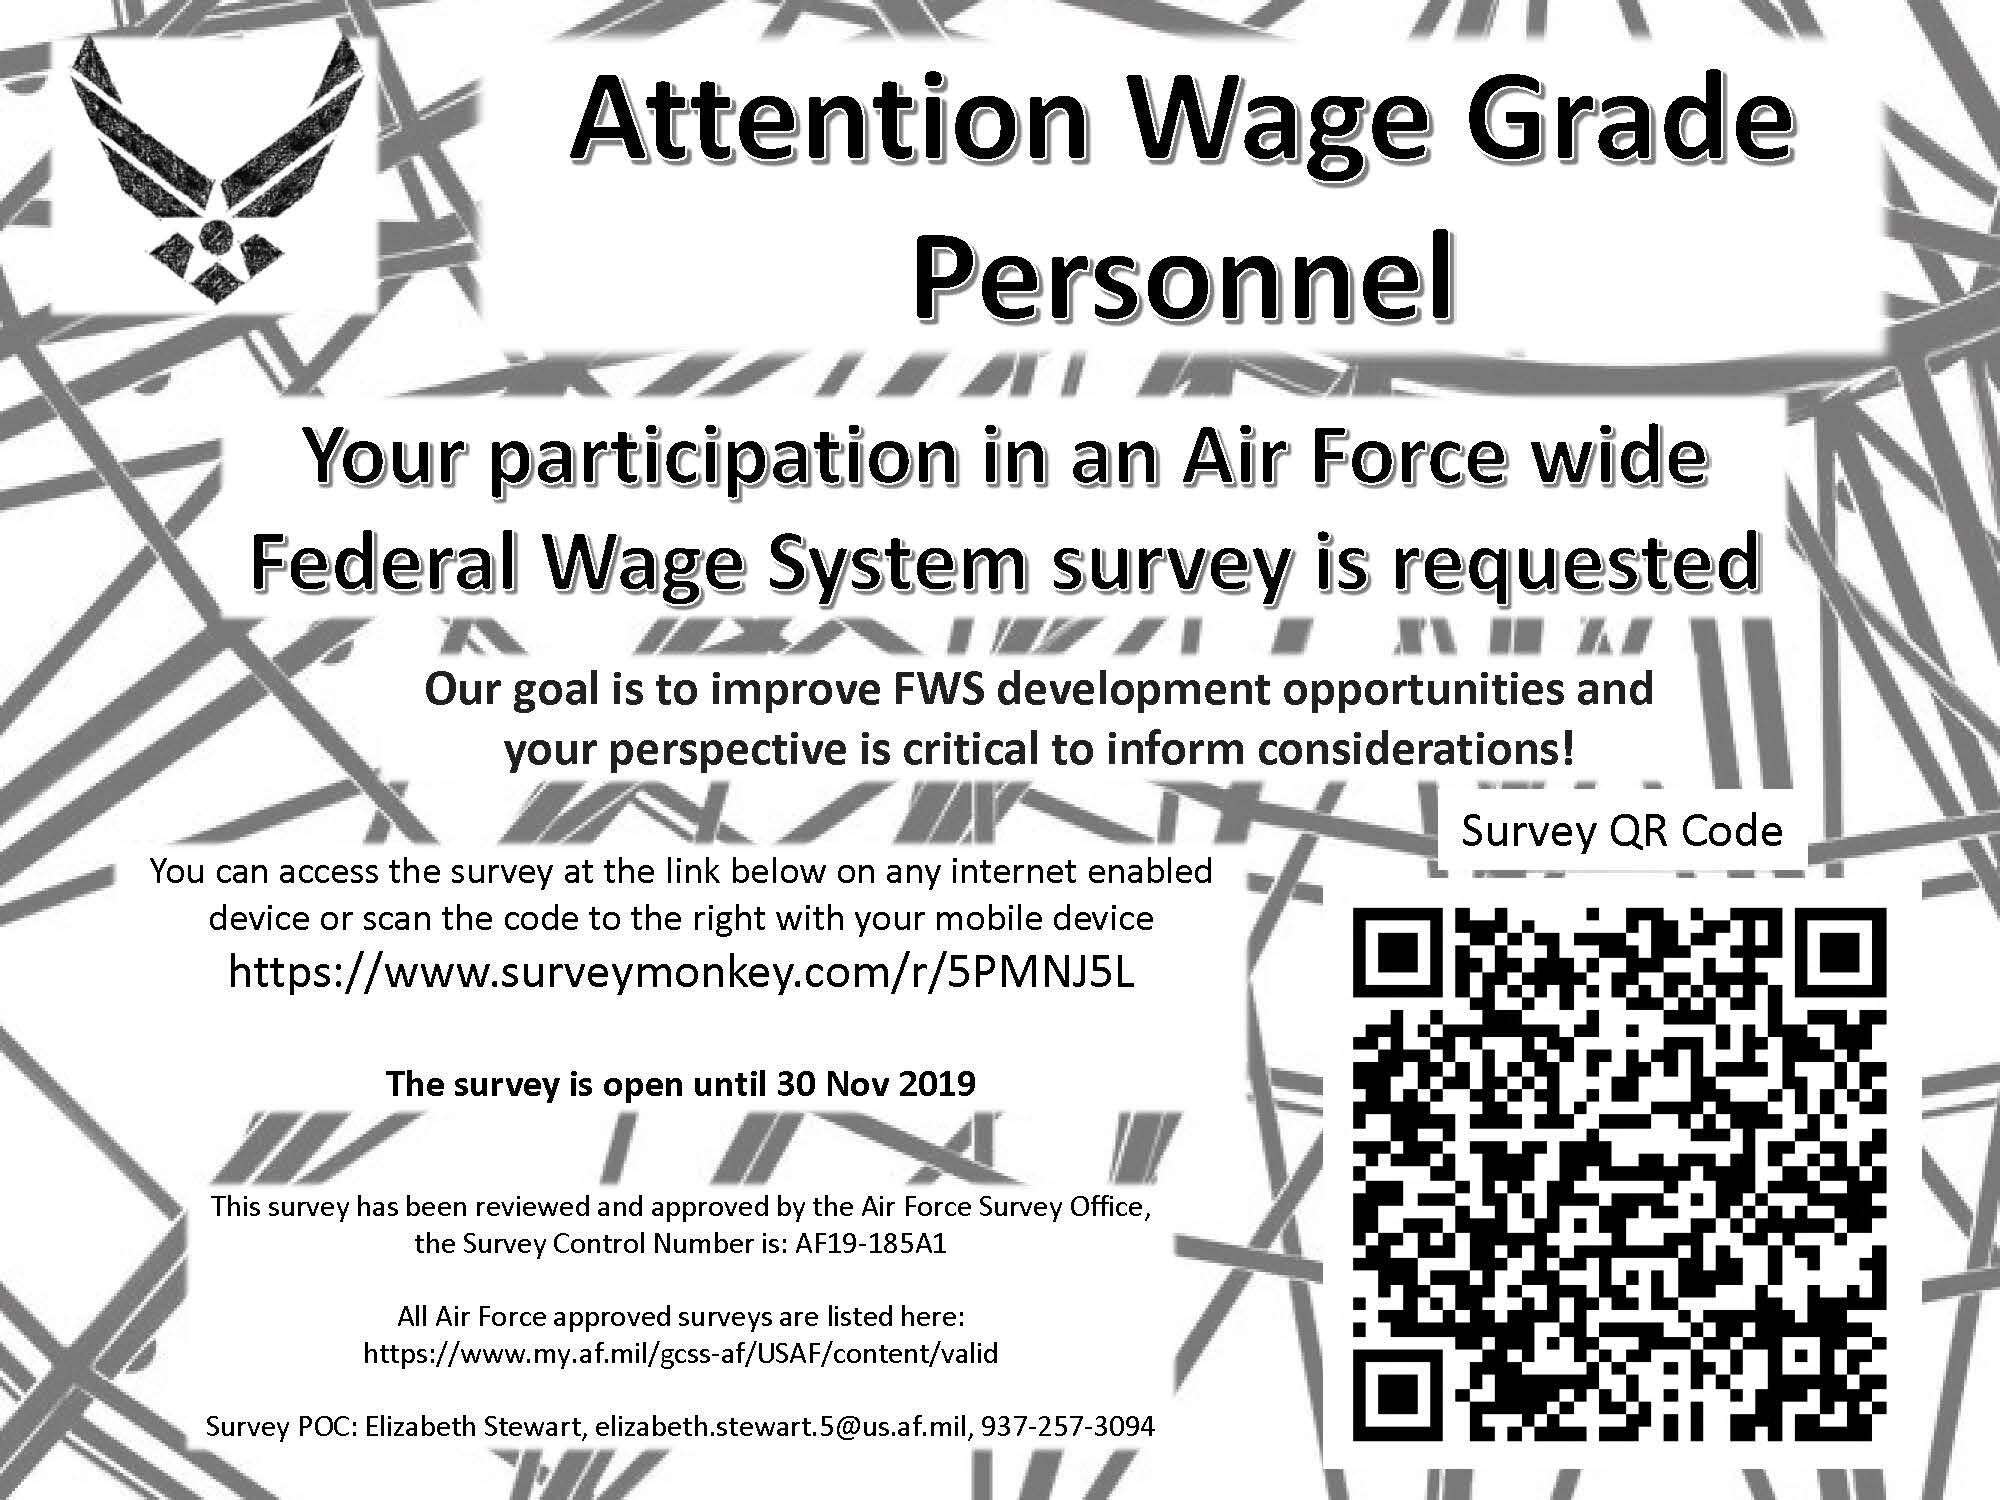 Air Force Materiel Command employees in the Federal Wage Grade System are invited to participate in a survey to assess developmental needs and opportunities across the cohort.
The consolidated results and key findings of this Air Force-wide survey will be used to inform and guide WG employee development and retention efforts.
The survey is available online through Nov. 30, 2019 at https://www.surveymonkey.com/r/KV63N7Q.